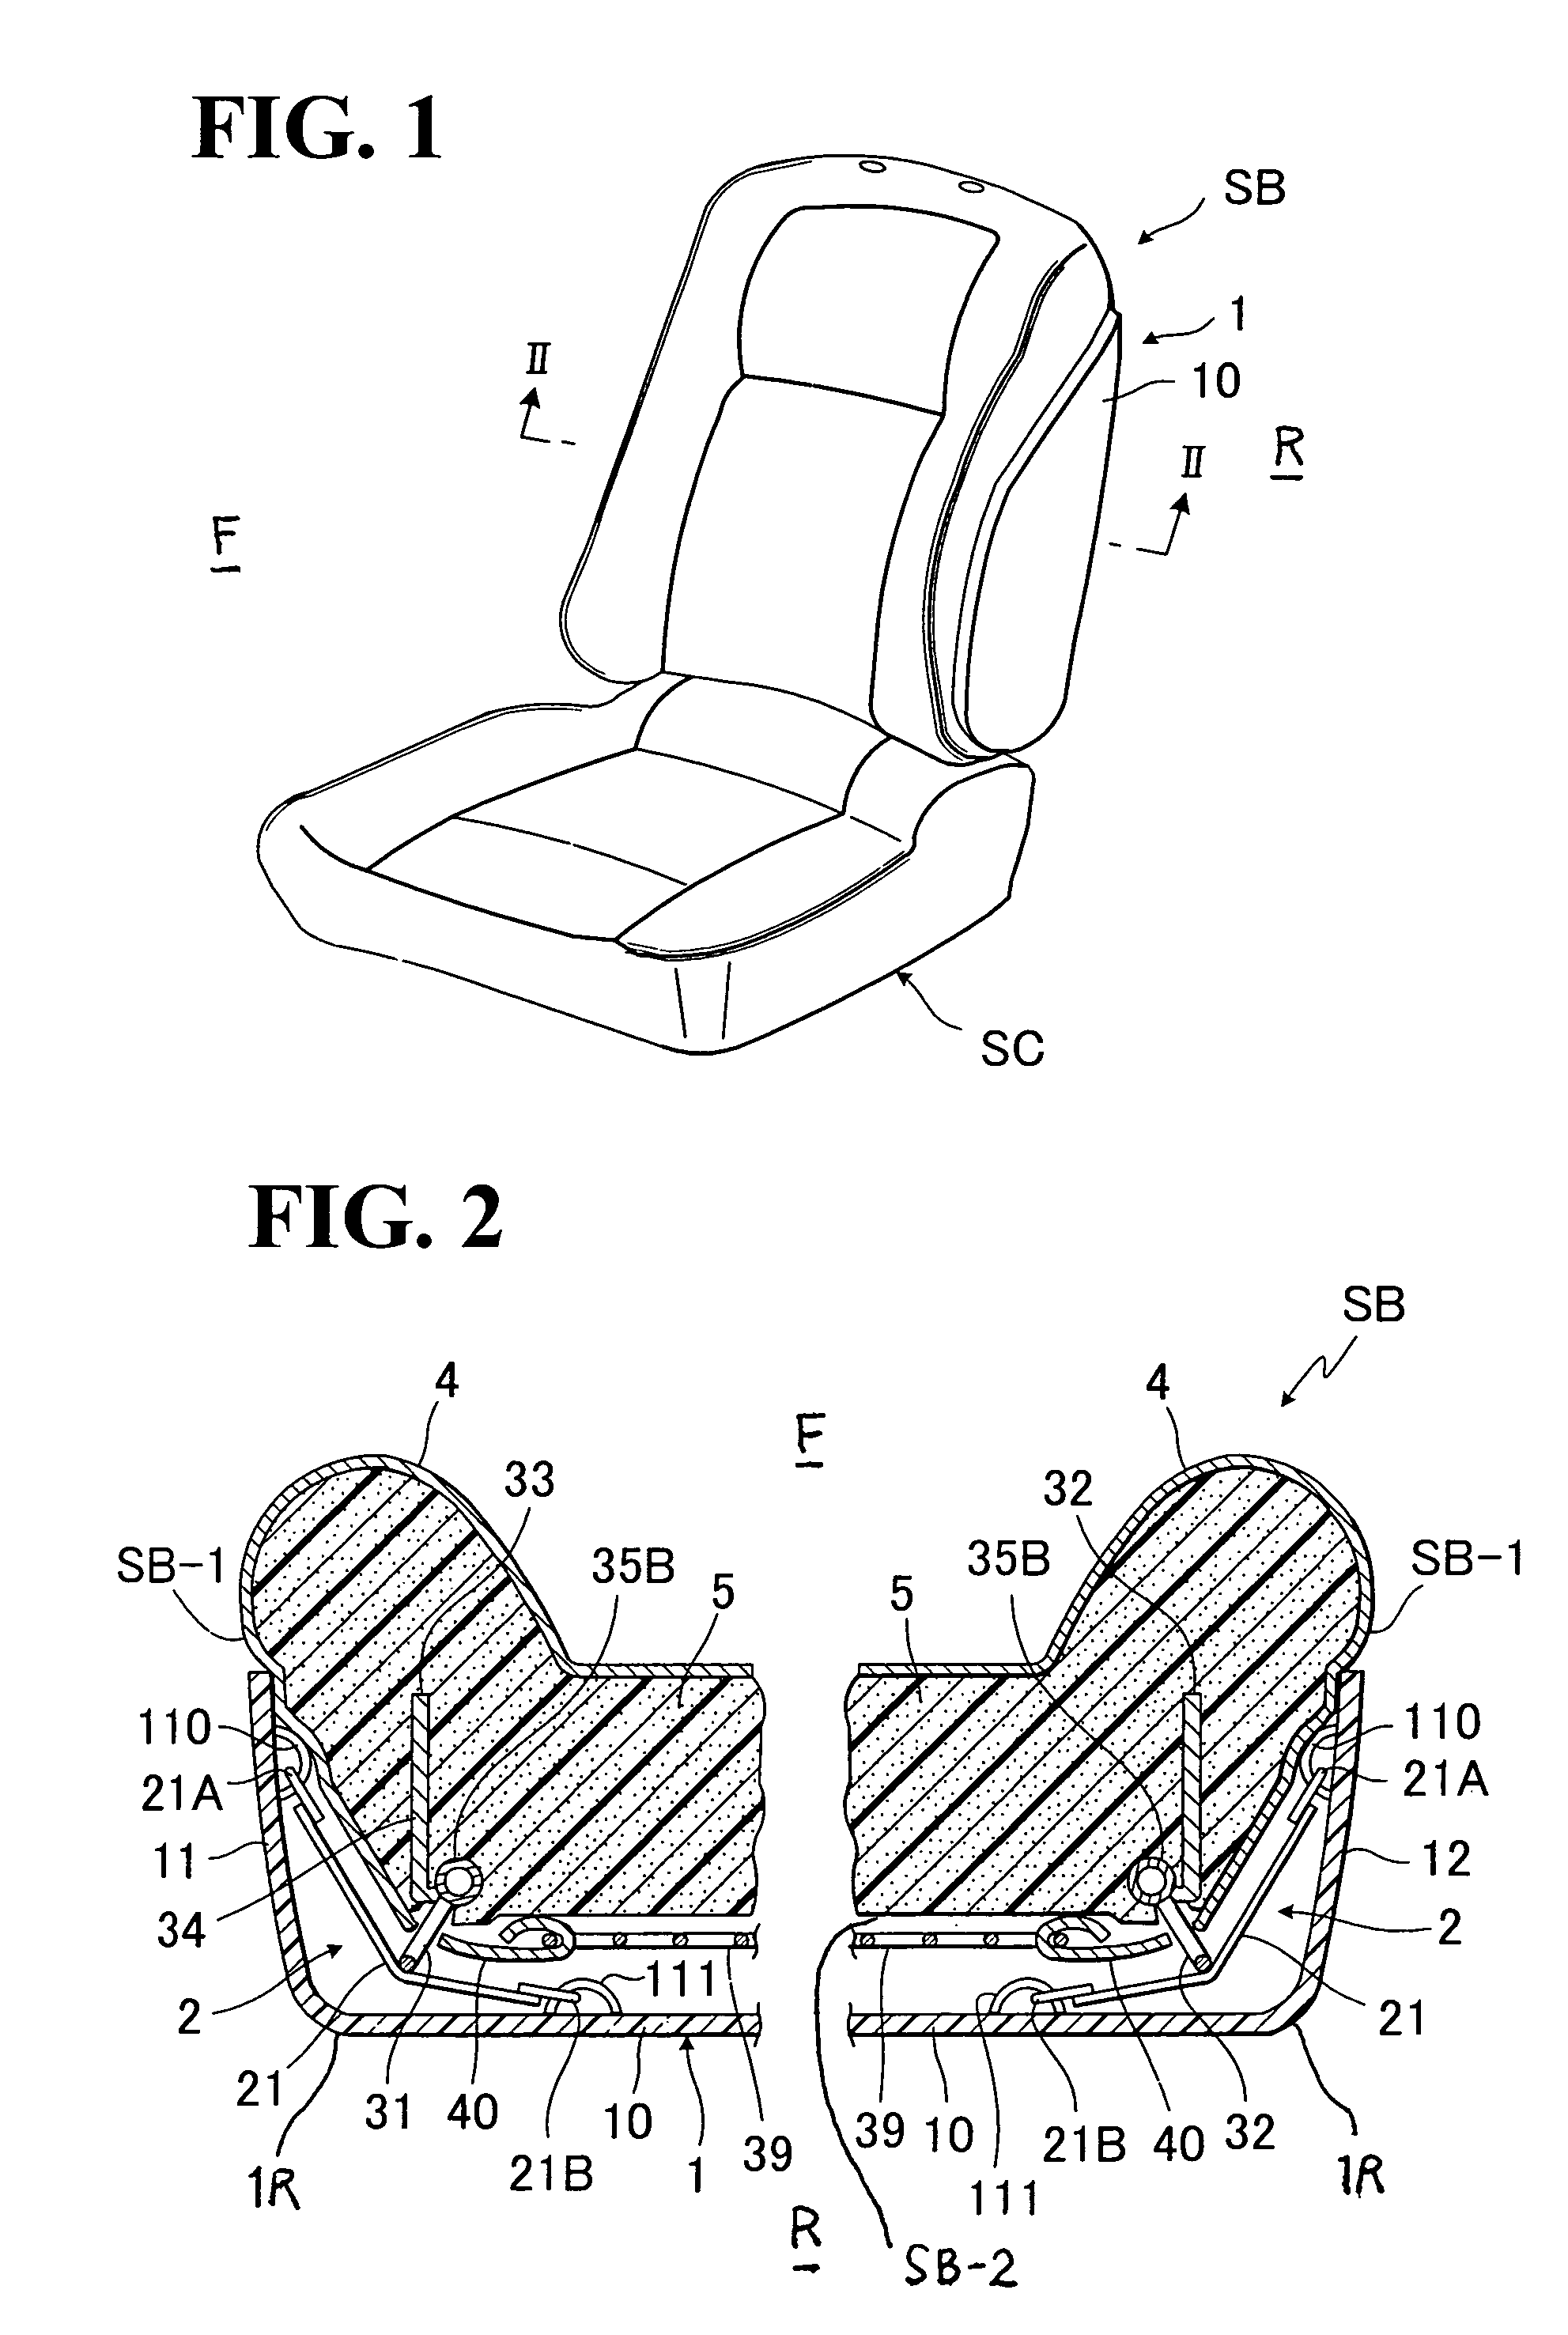 Seat back of automotive seat with back board